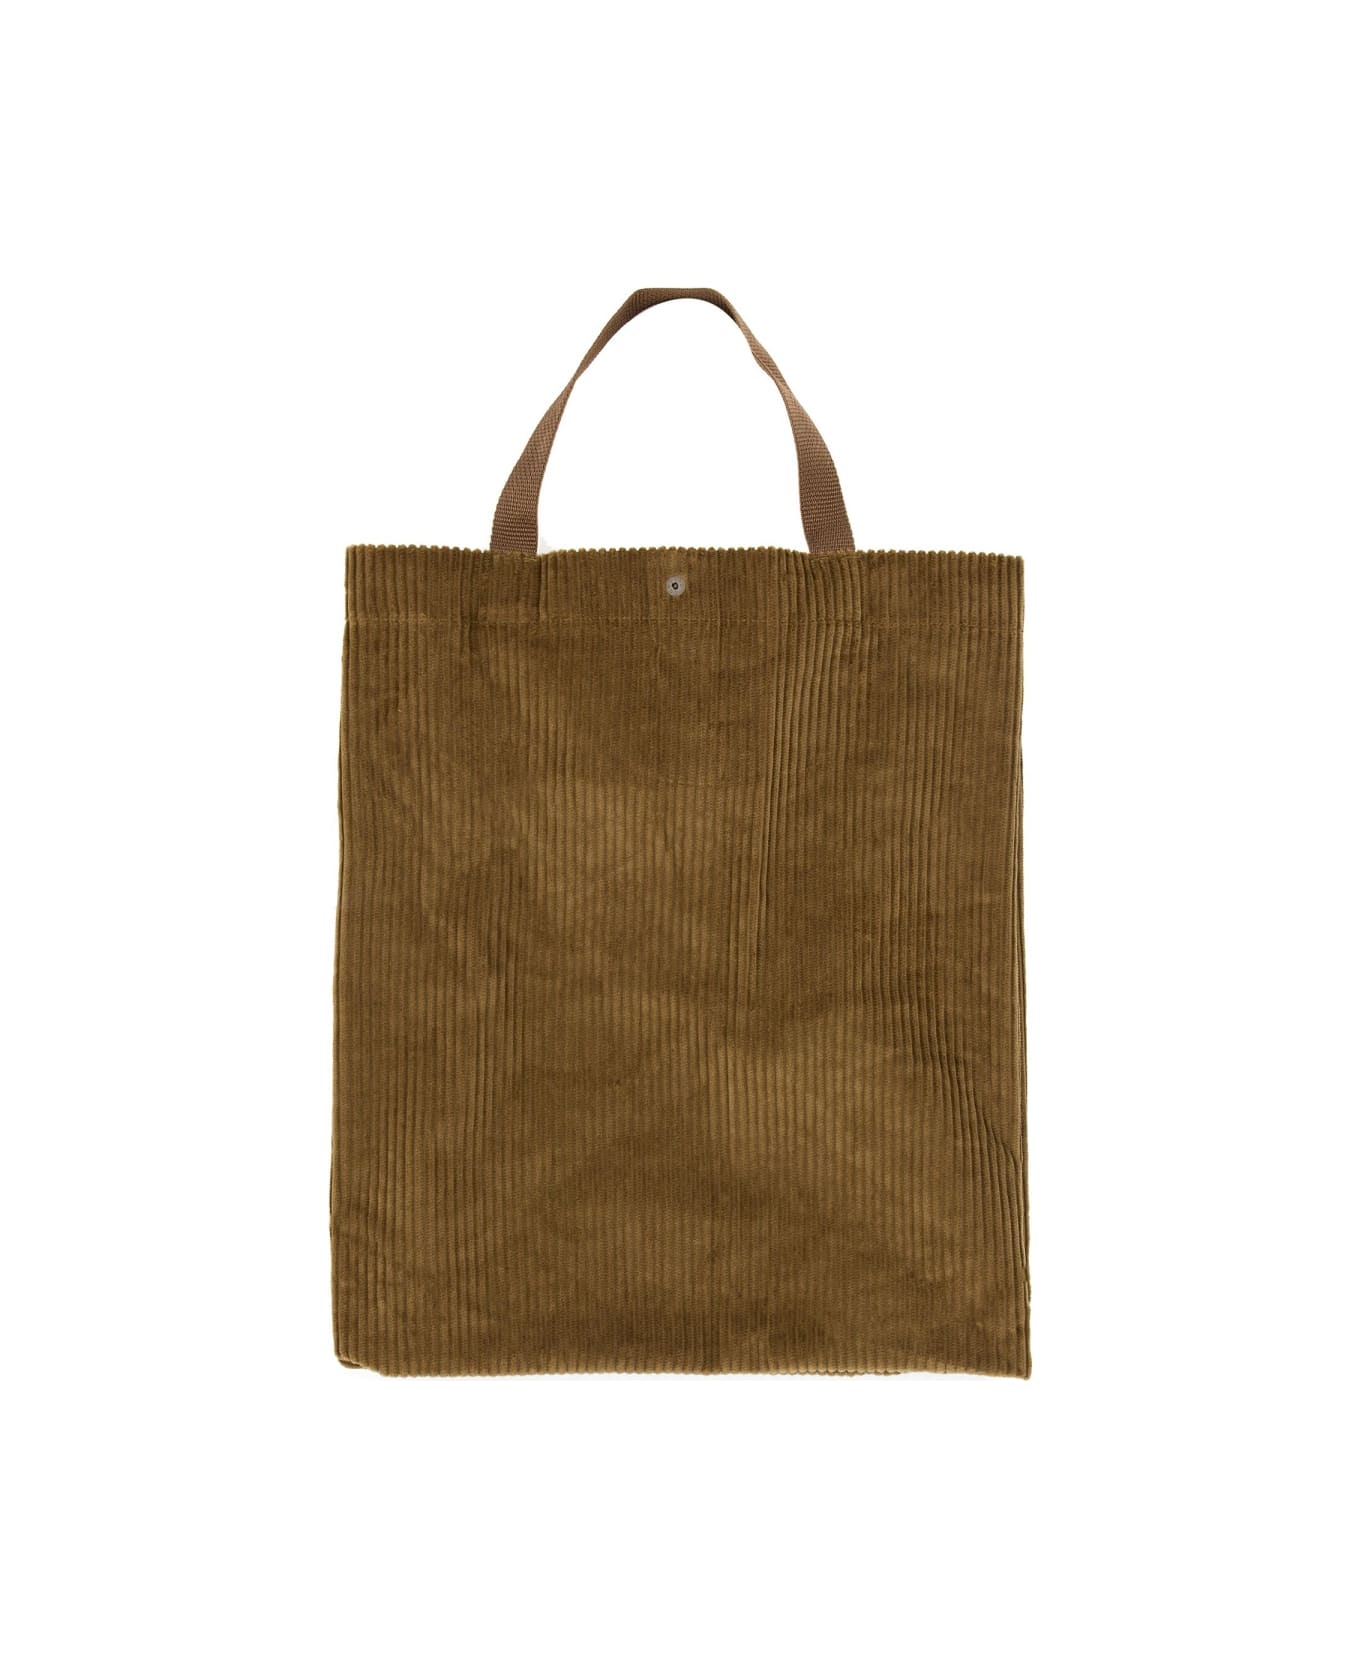 Engineered Garments "all Tote" Bag - BROWN トートバッグ